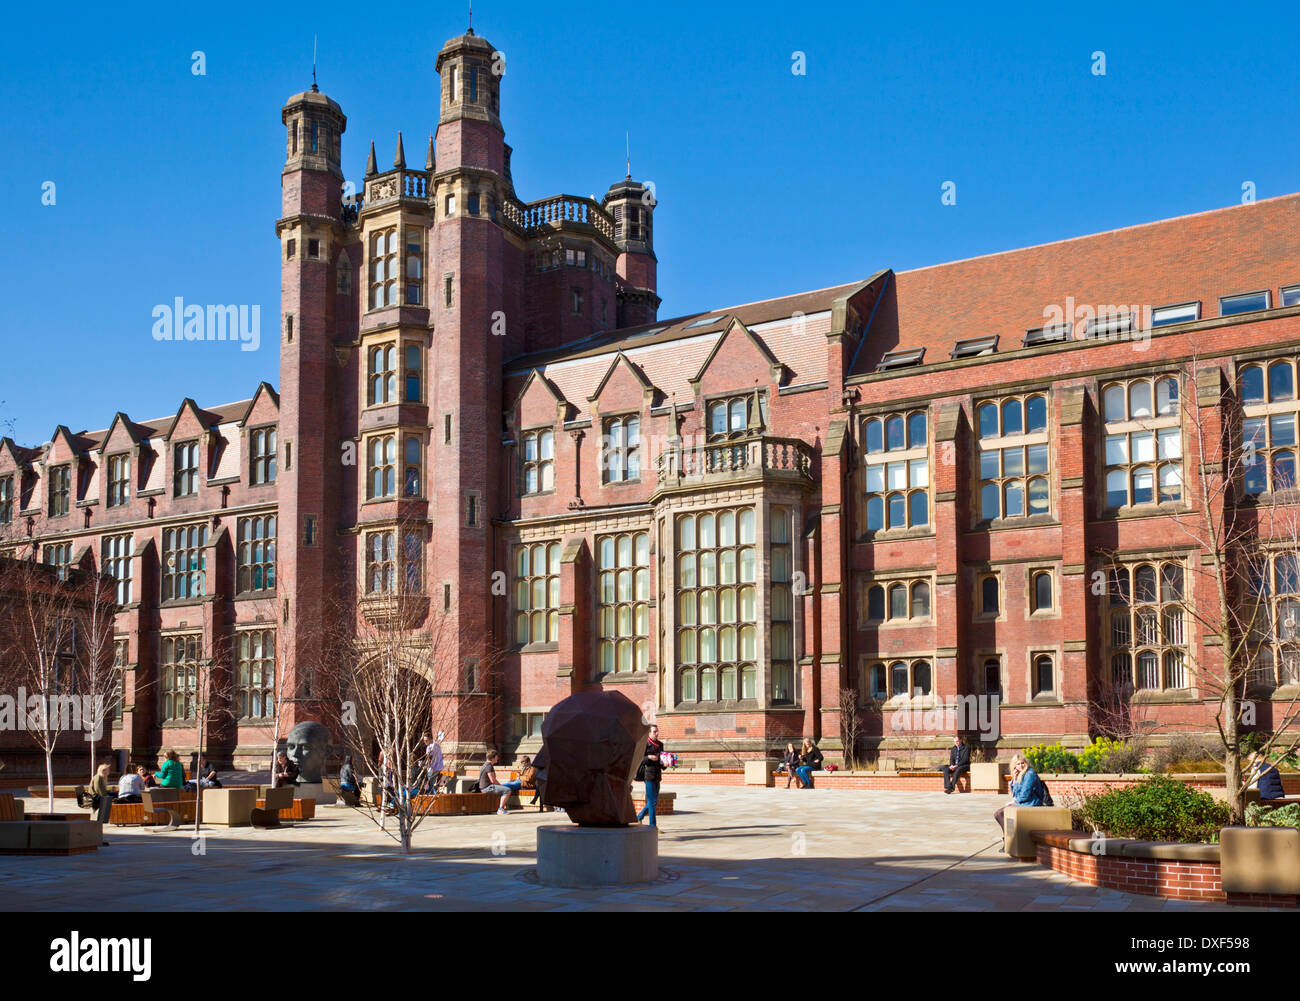 Newcastle University of newcastle campus Armstrong bâtiment Newcastle upon Tyne Tyne and Wear England GB UK Europe Banque D'Images